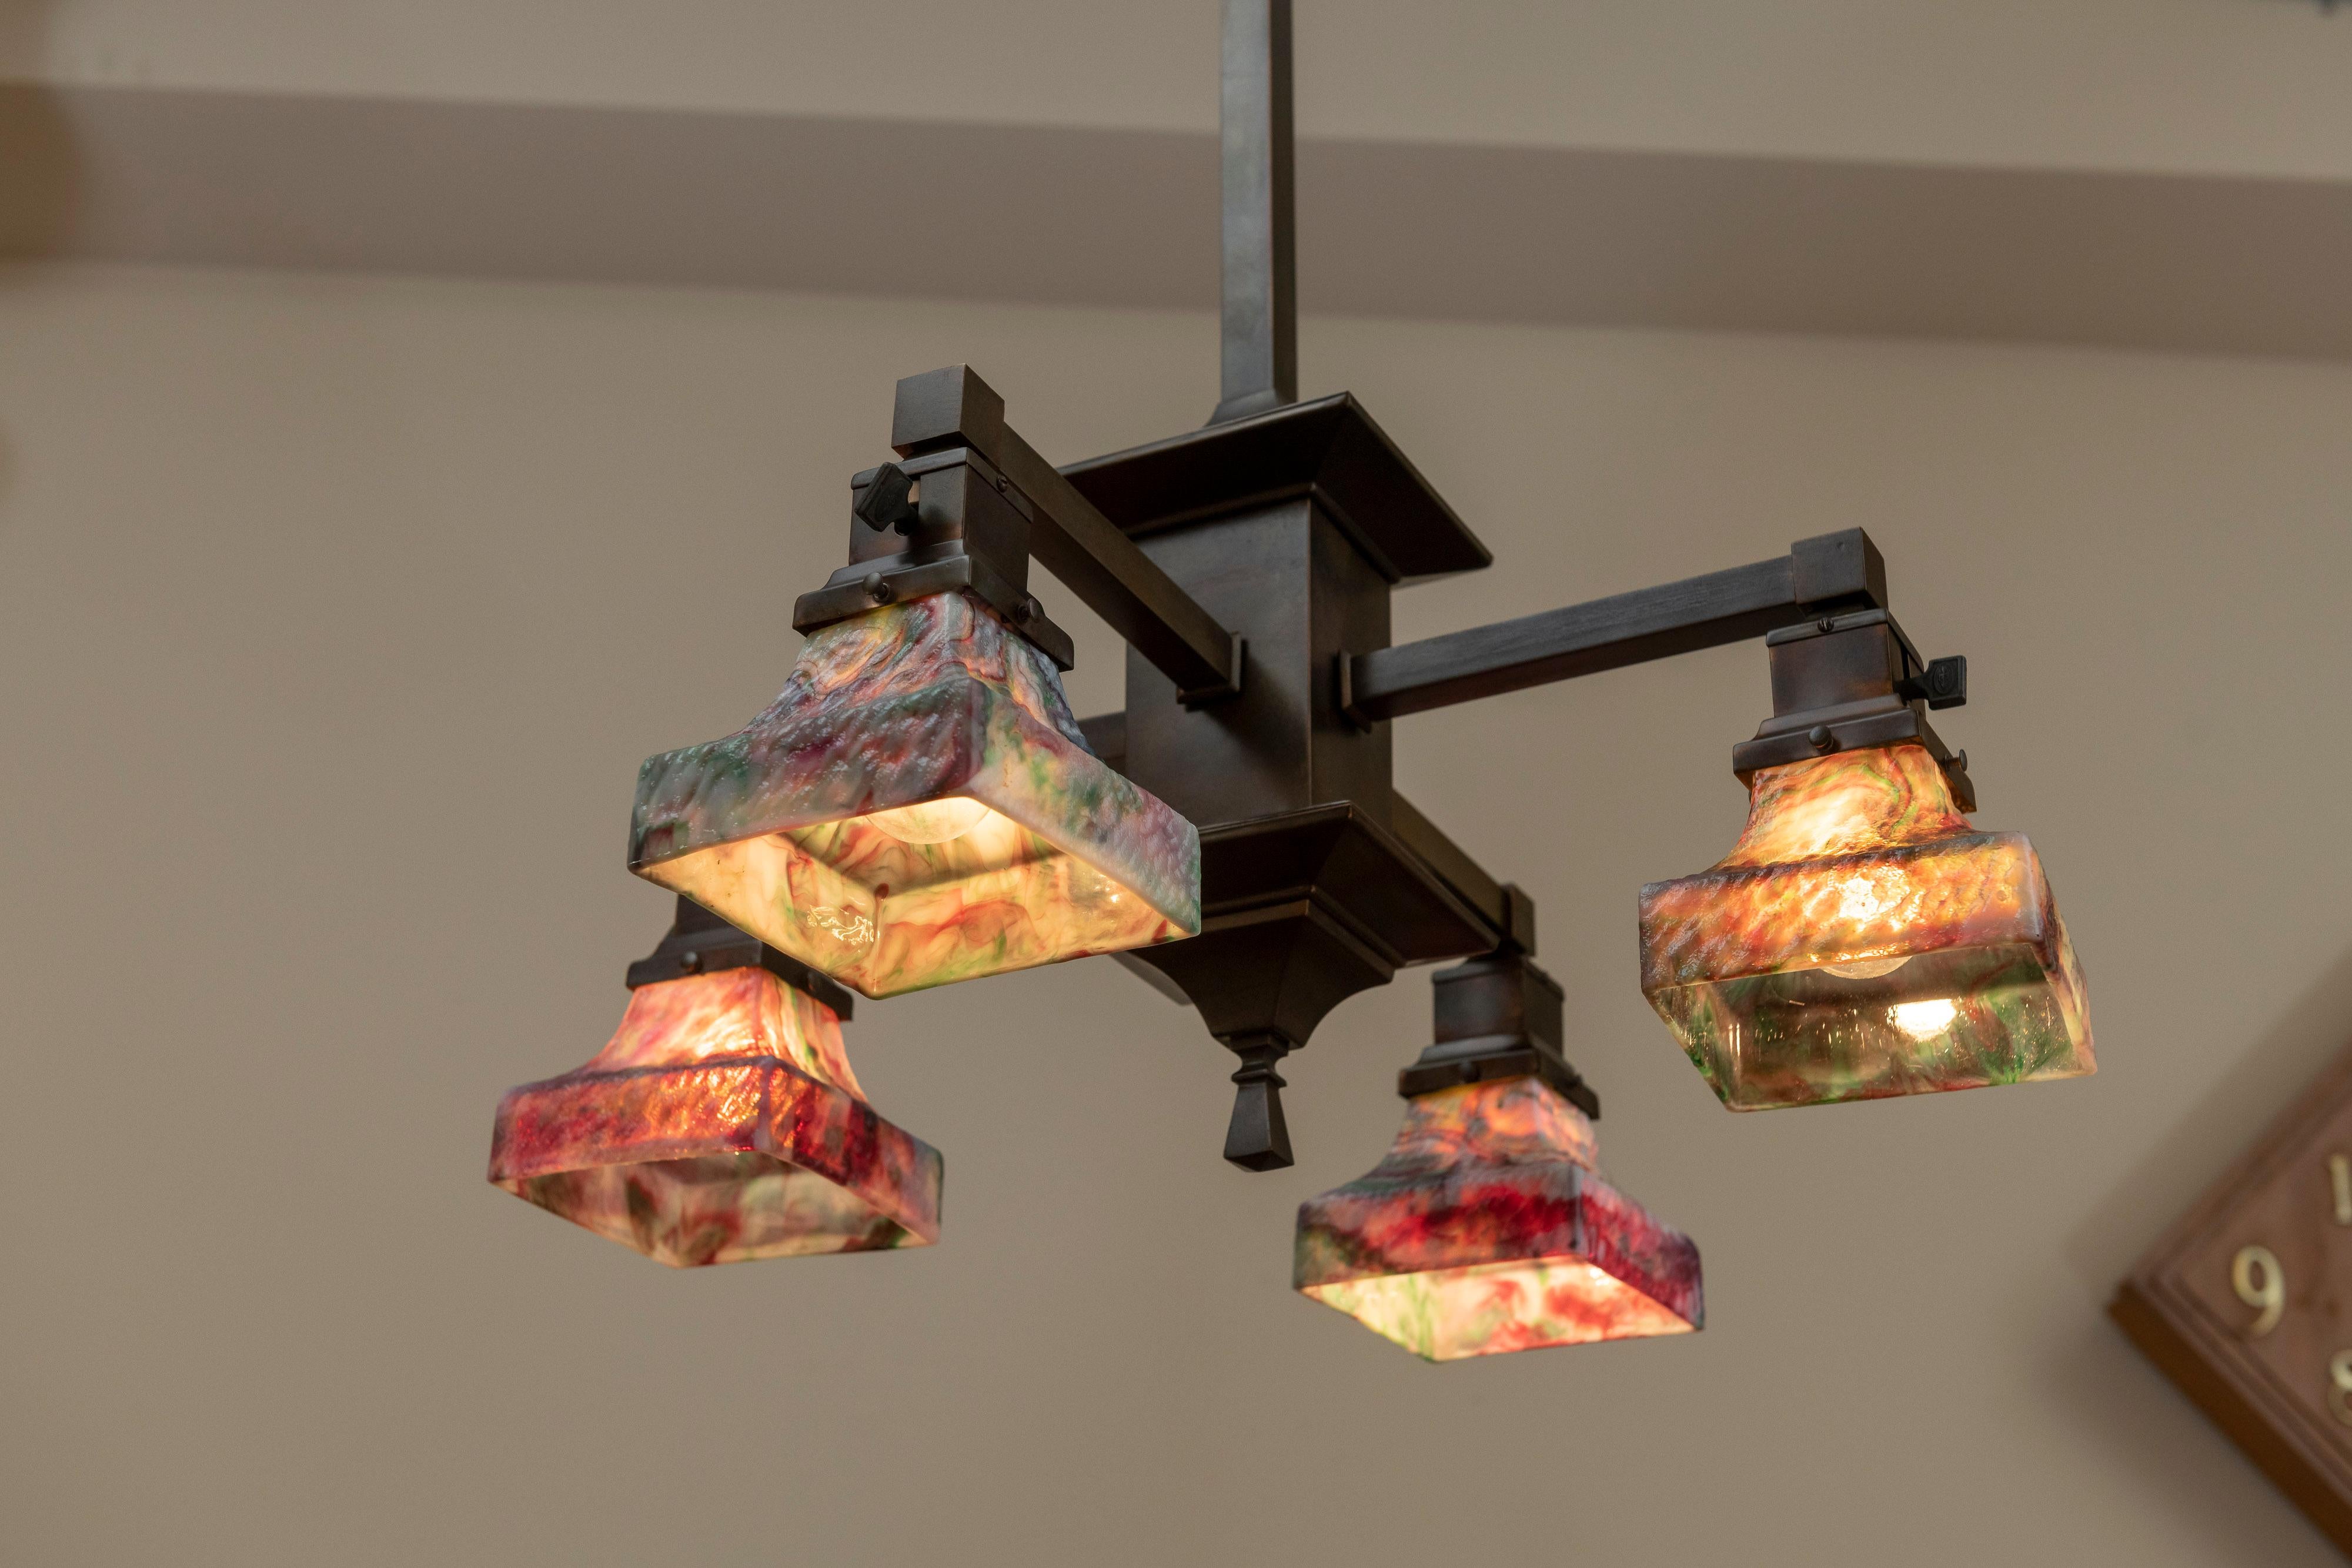 This chandelier is a total commitment to the Arts & Crafts movement. The shades are incredible with amazing color and texture. They were produced by the Kokomo Glass Co. from Indiana, which dates back to the 1880s.
This chandelier has been newly